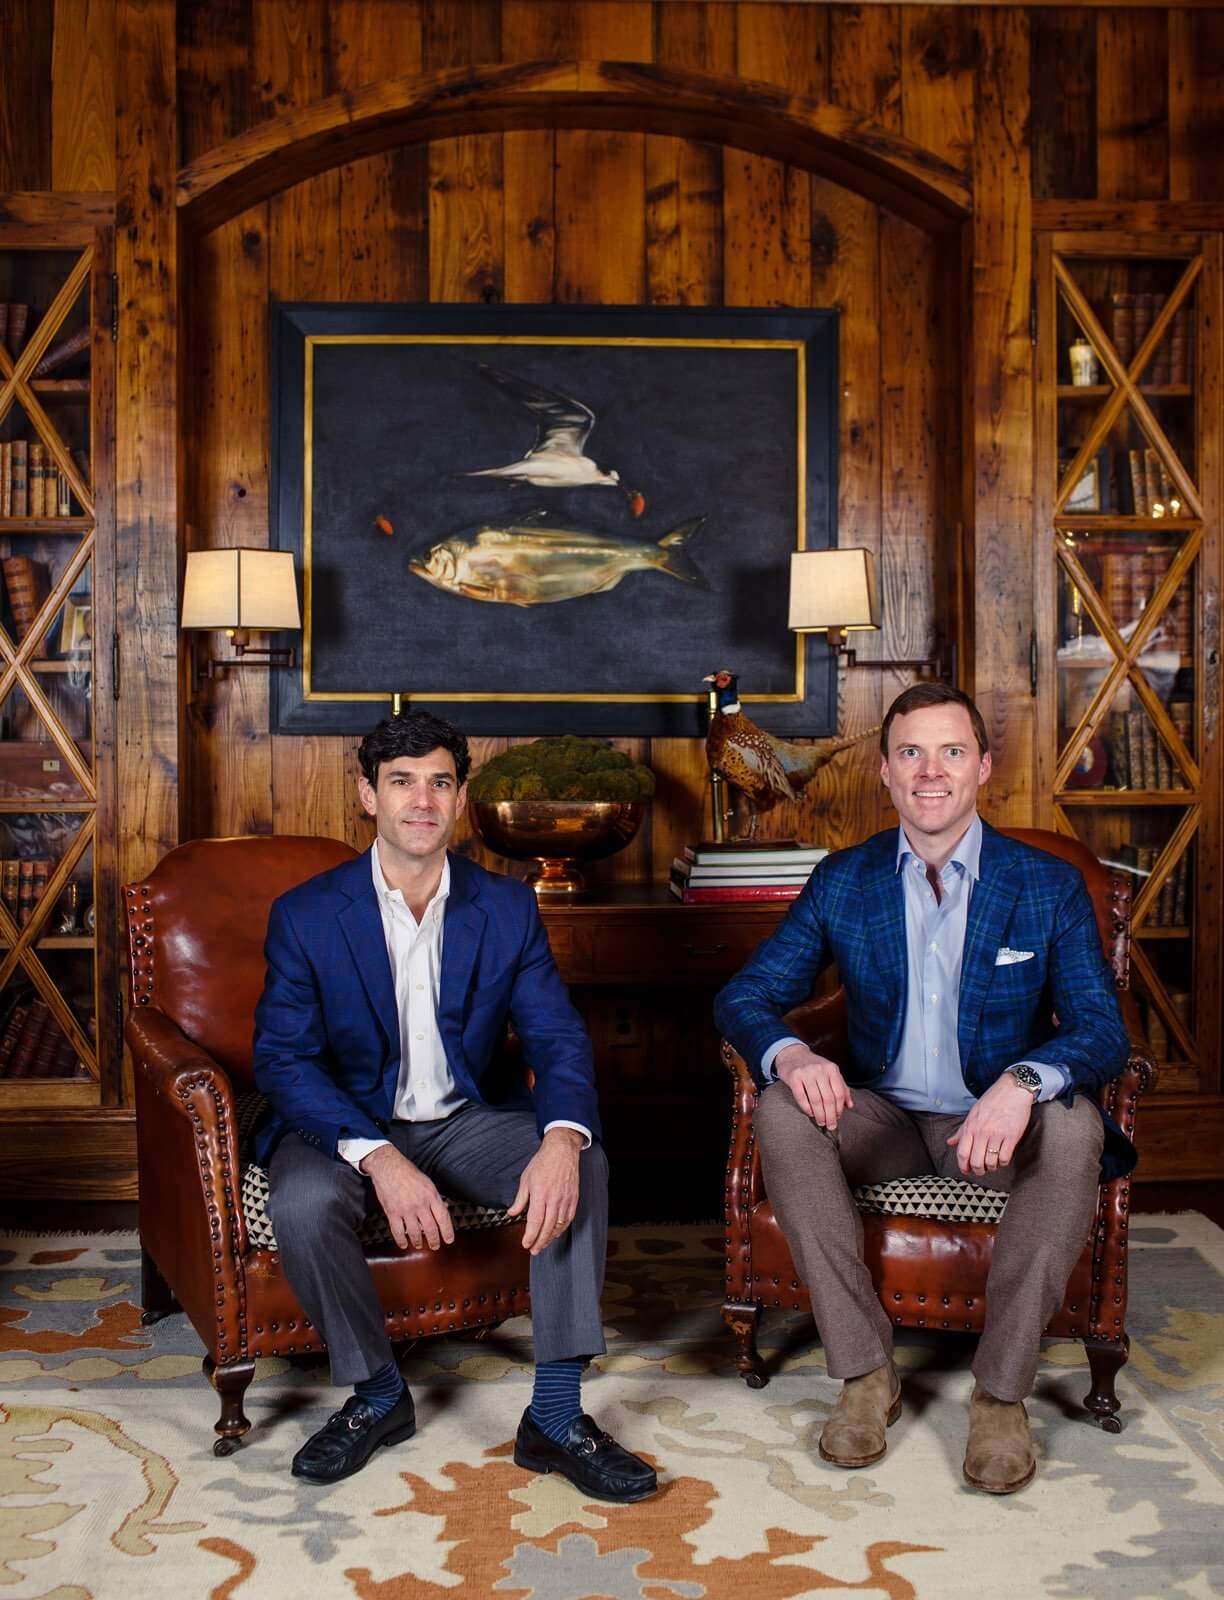 Photo of Worth Jones and William Ware sitting on chairs in wood panel wall office